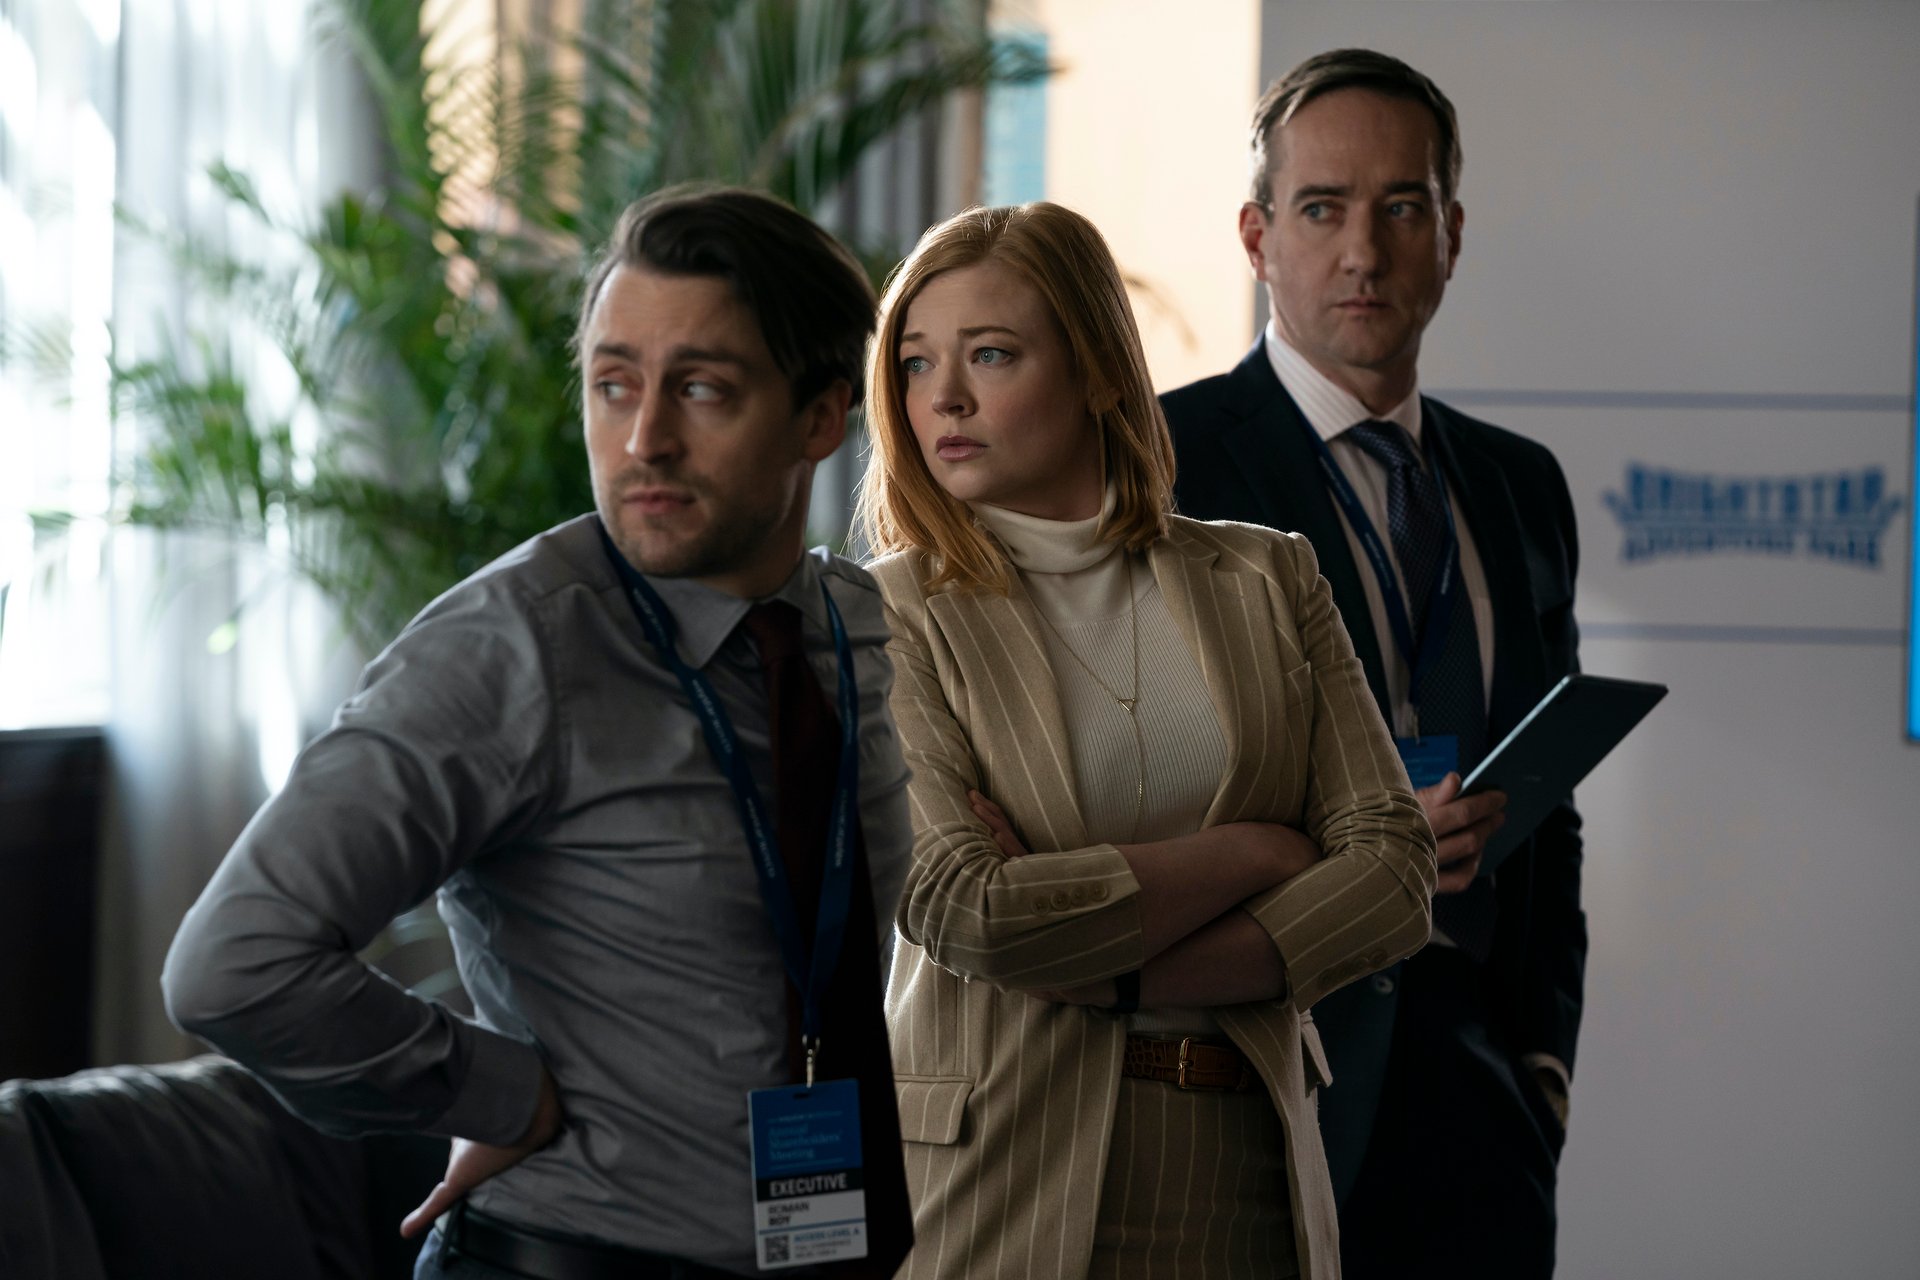 Kieran Culkin, Sarah Snook, and Matthew Macfadyen as Roman Roy, Shiv Roy, and Tom Wambsgans in 'Succession' Season 3. They're standing next to one another and looking at something to the left.